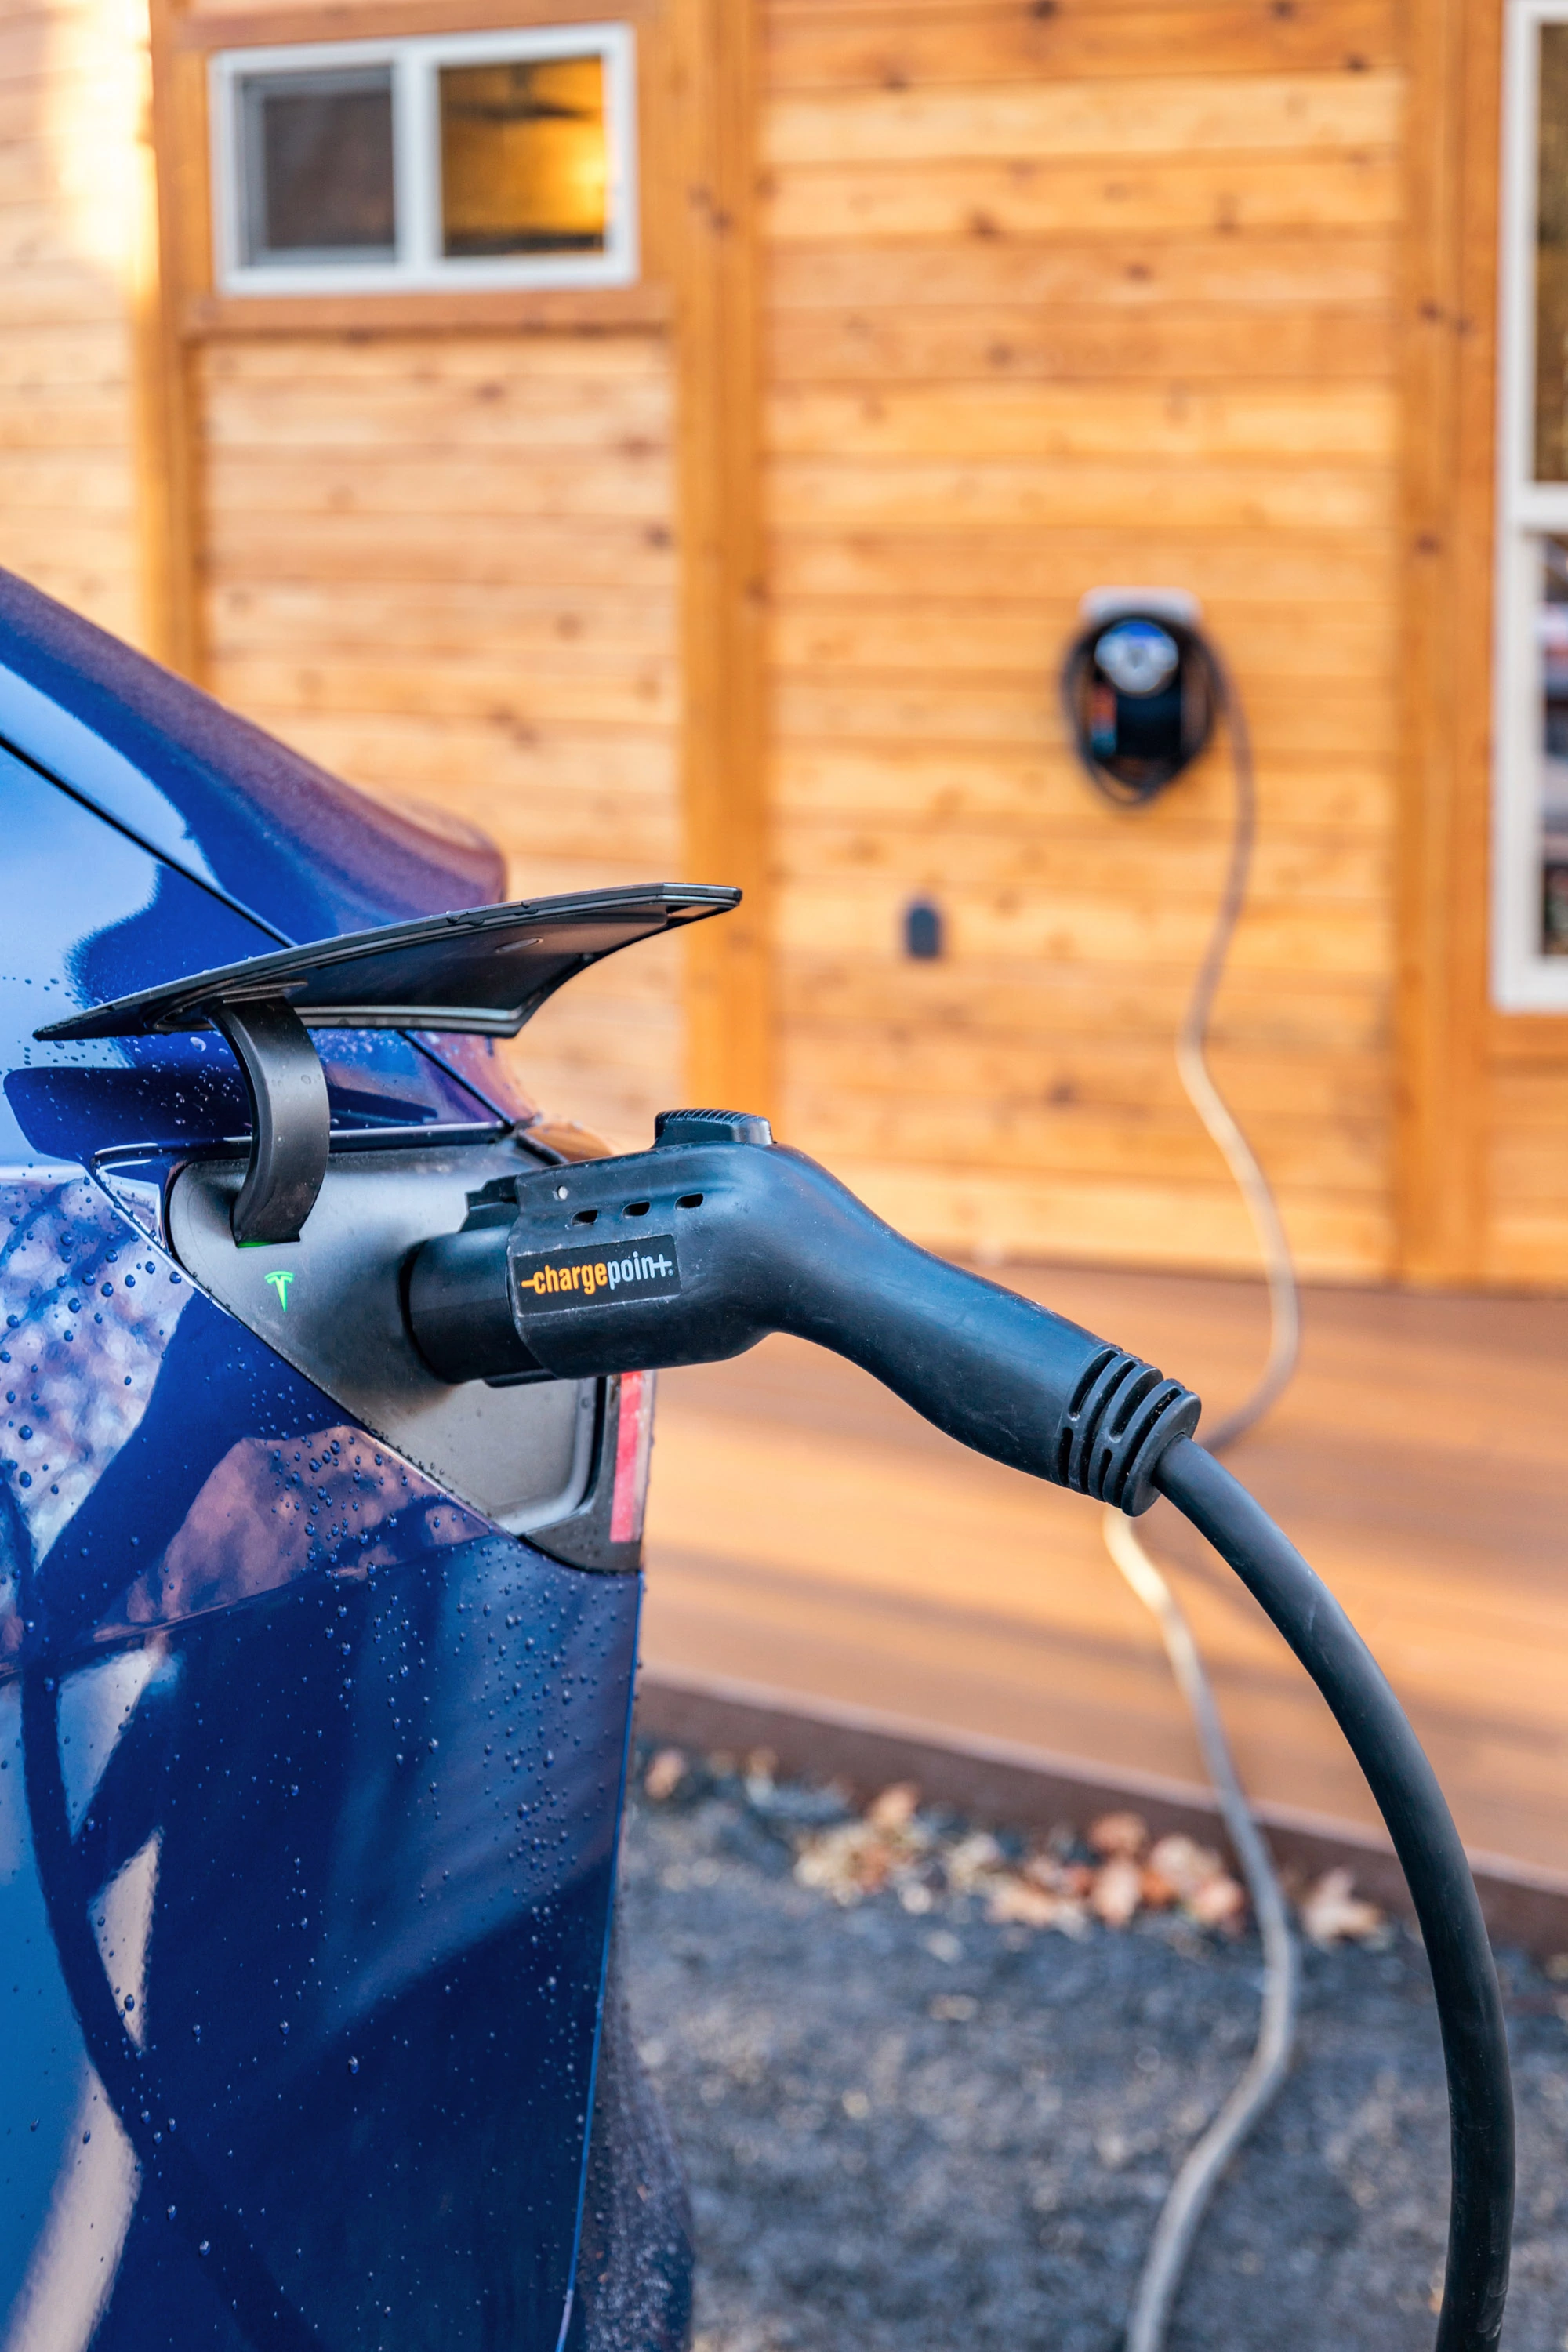 <span  class="uc_style_uc_tiles_grid_image_elementor_uc_items_attribute_title" style="color:#ffffff;">Fast Level 2 EV charger. We're getting 30-40mi/hour.</span>